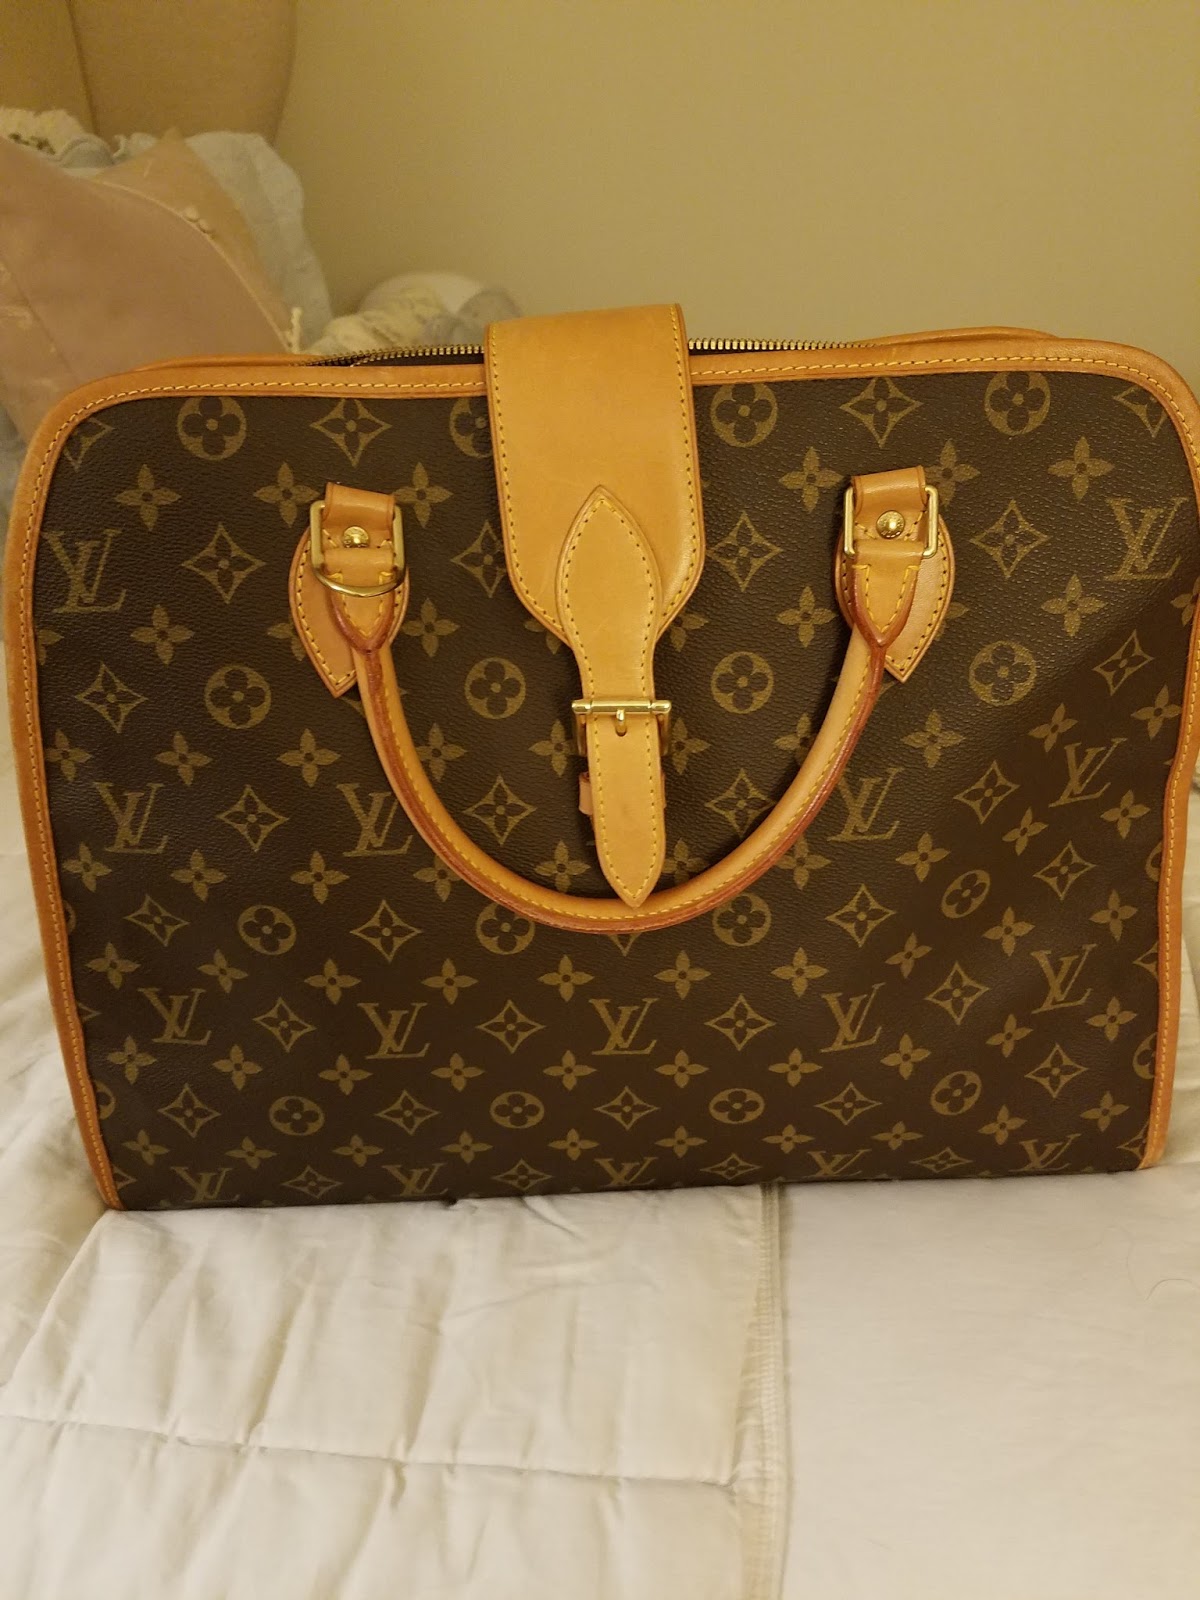 A Home for Elegance: My Louis Vuitton Collection